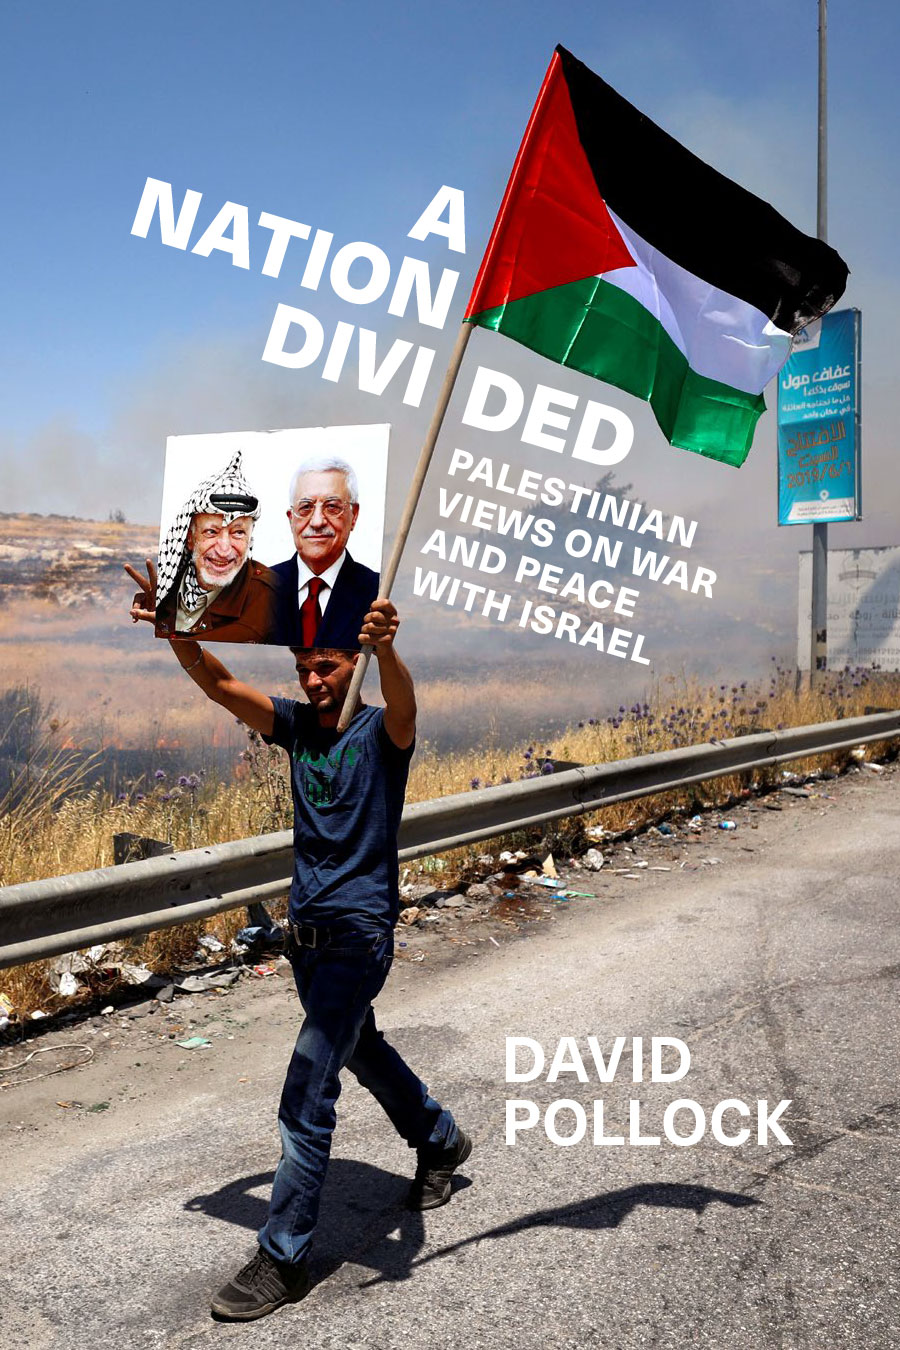 Book cover showing a man holding a Palestinian flag and a photo